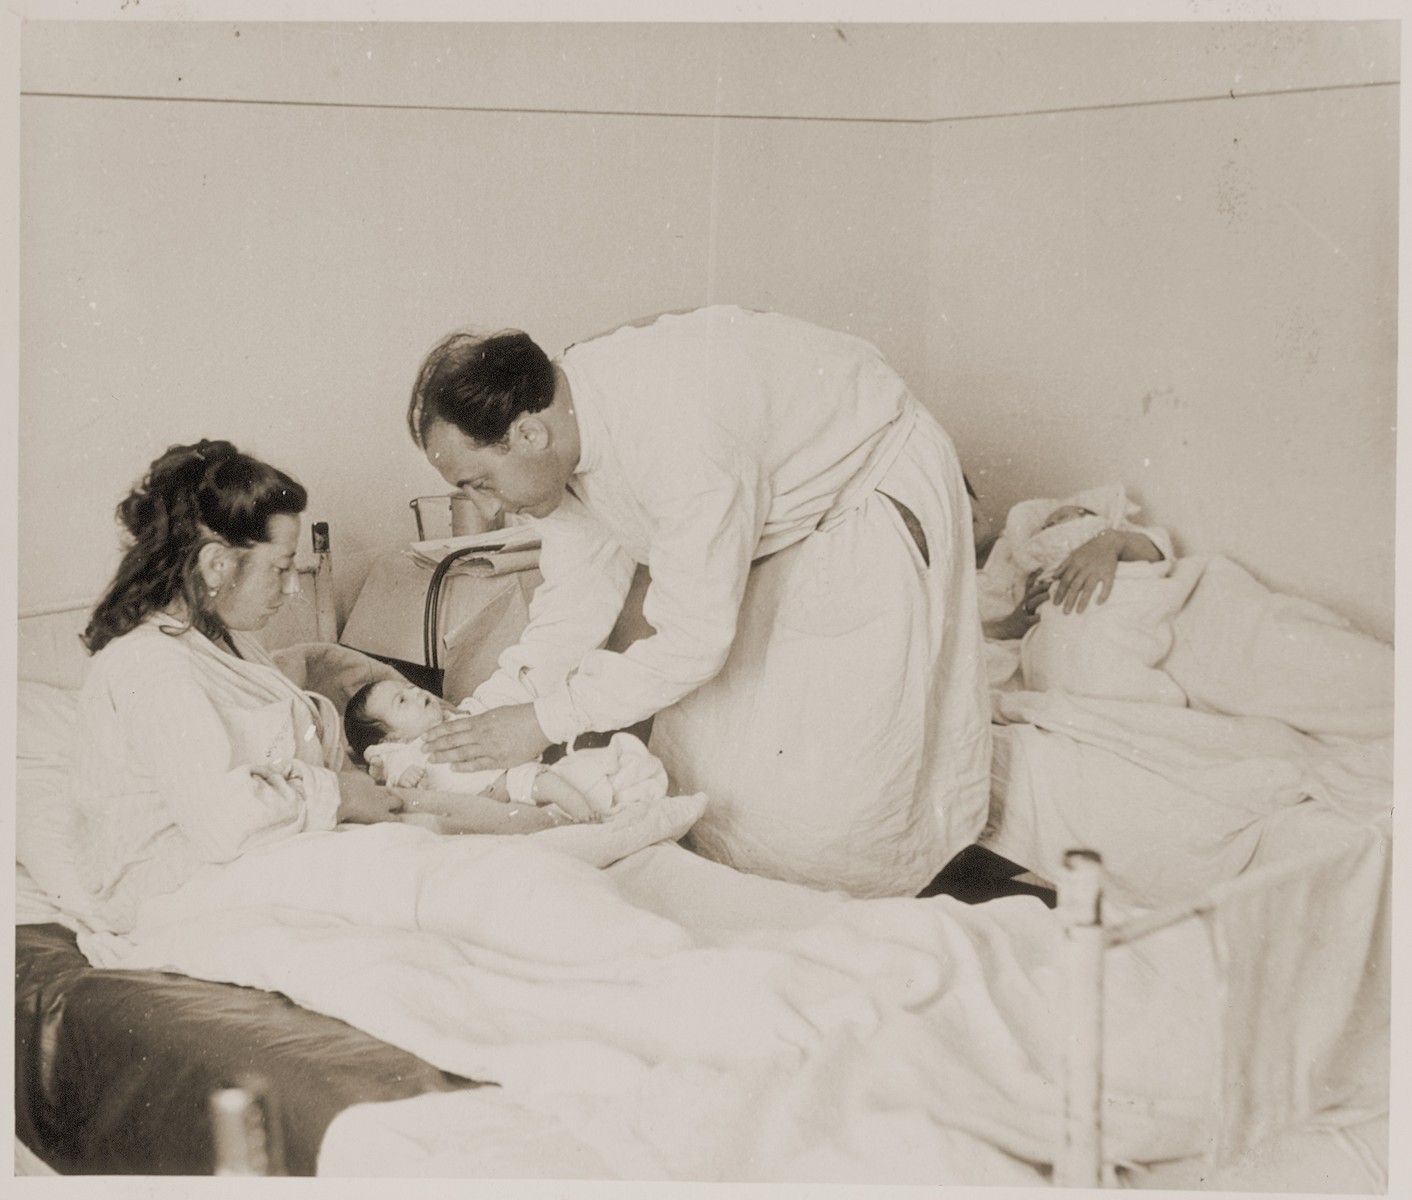 A doctor examines a newborn infant in the maternity ward of a hospital in Sankt Marien, Austria. 

Family album bearing the title "Motoring/Jewish DP camp/St. Marein [Sankt Marien]/School," that belonged to Moritz Friedler.  In 1946 and 1947, he served as a social worker with the Jewish Committee for Relief Abroad at the Sankt Marien DP camp in the British zone of Austria. Friedler subsequently became the JDC's Area Director in Linz, Austria.  The photo album documents Jewish DP life in both places.